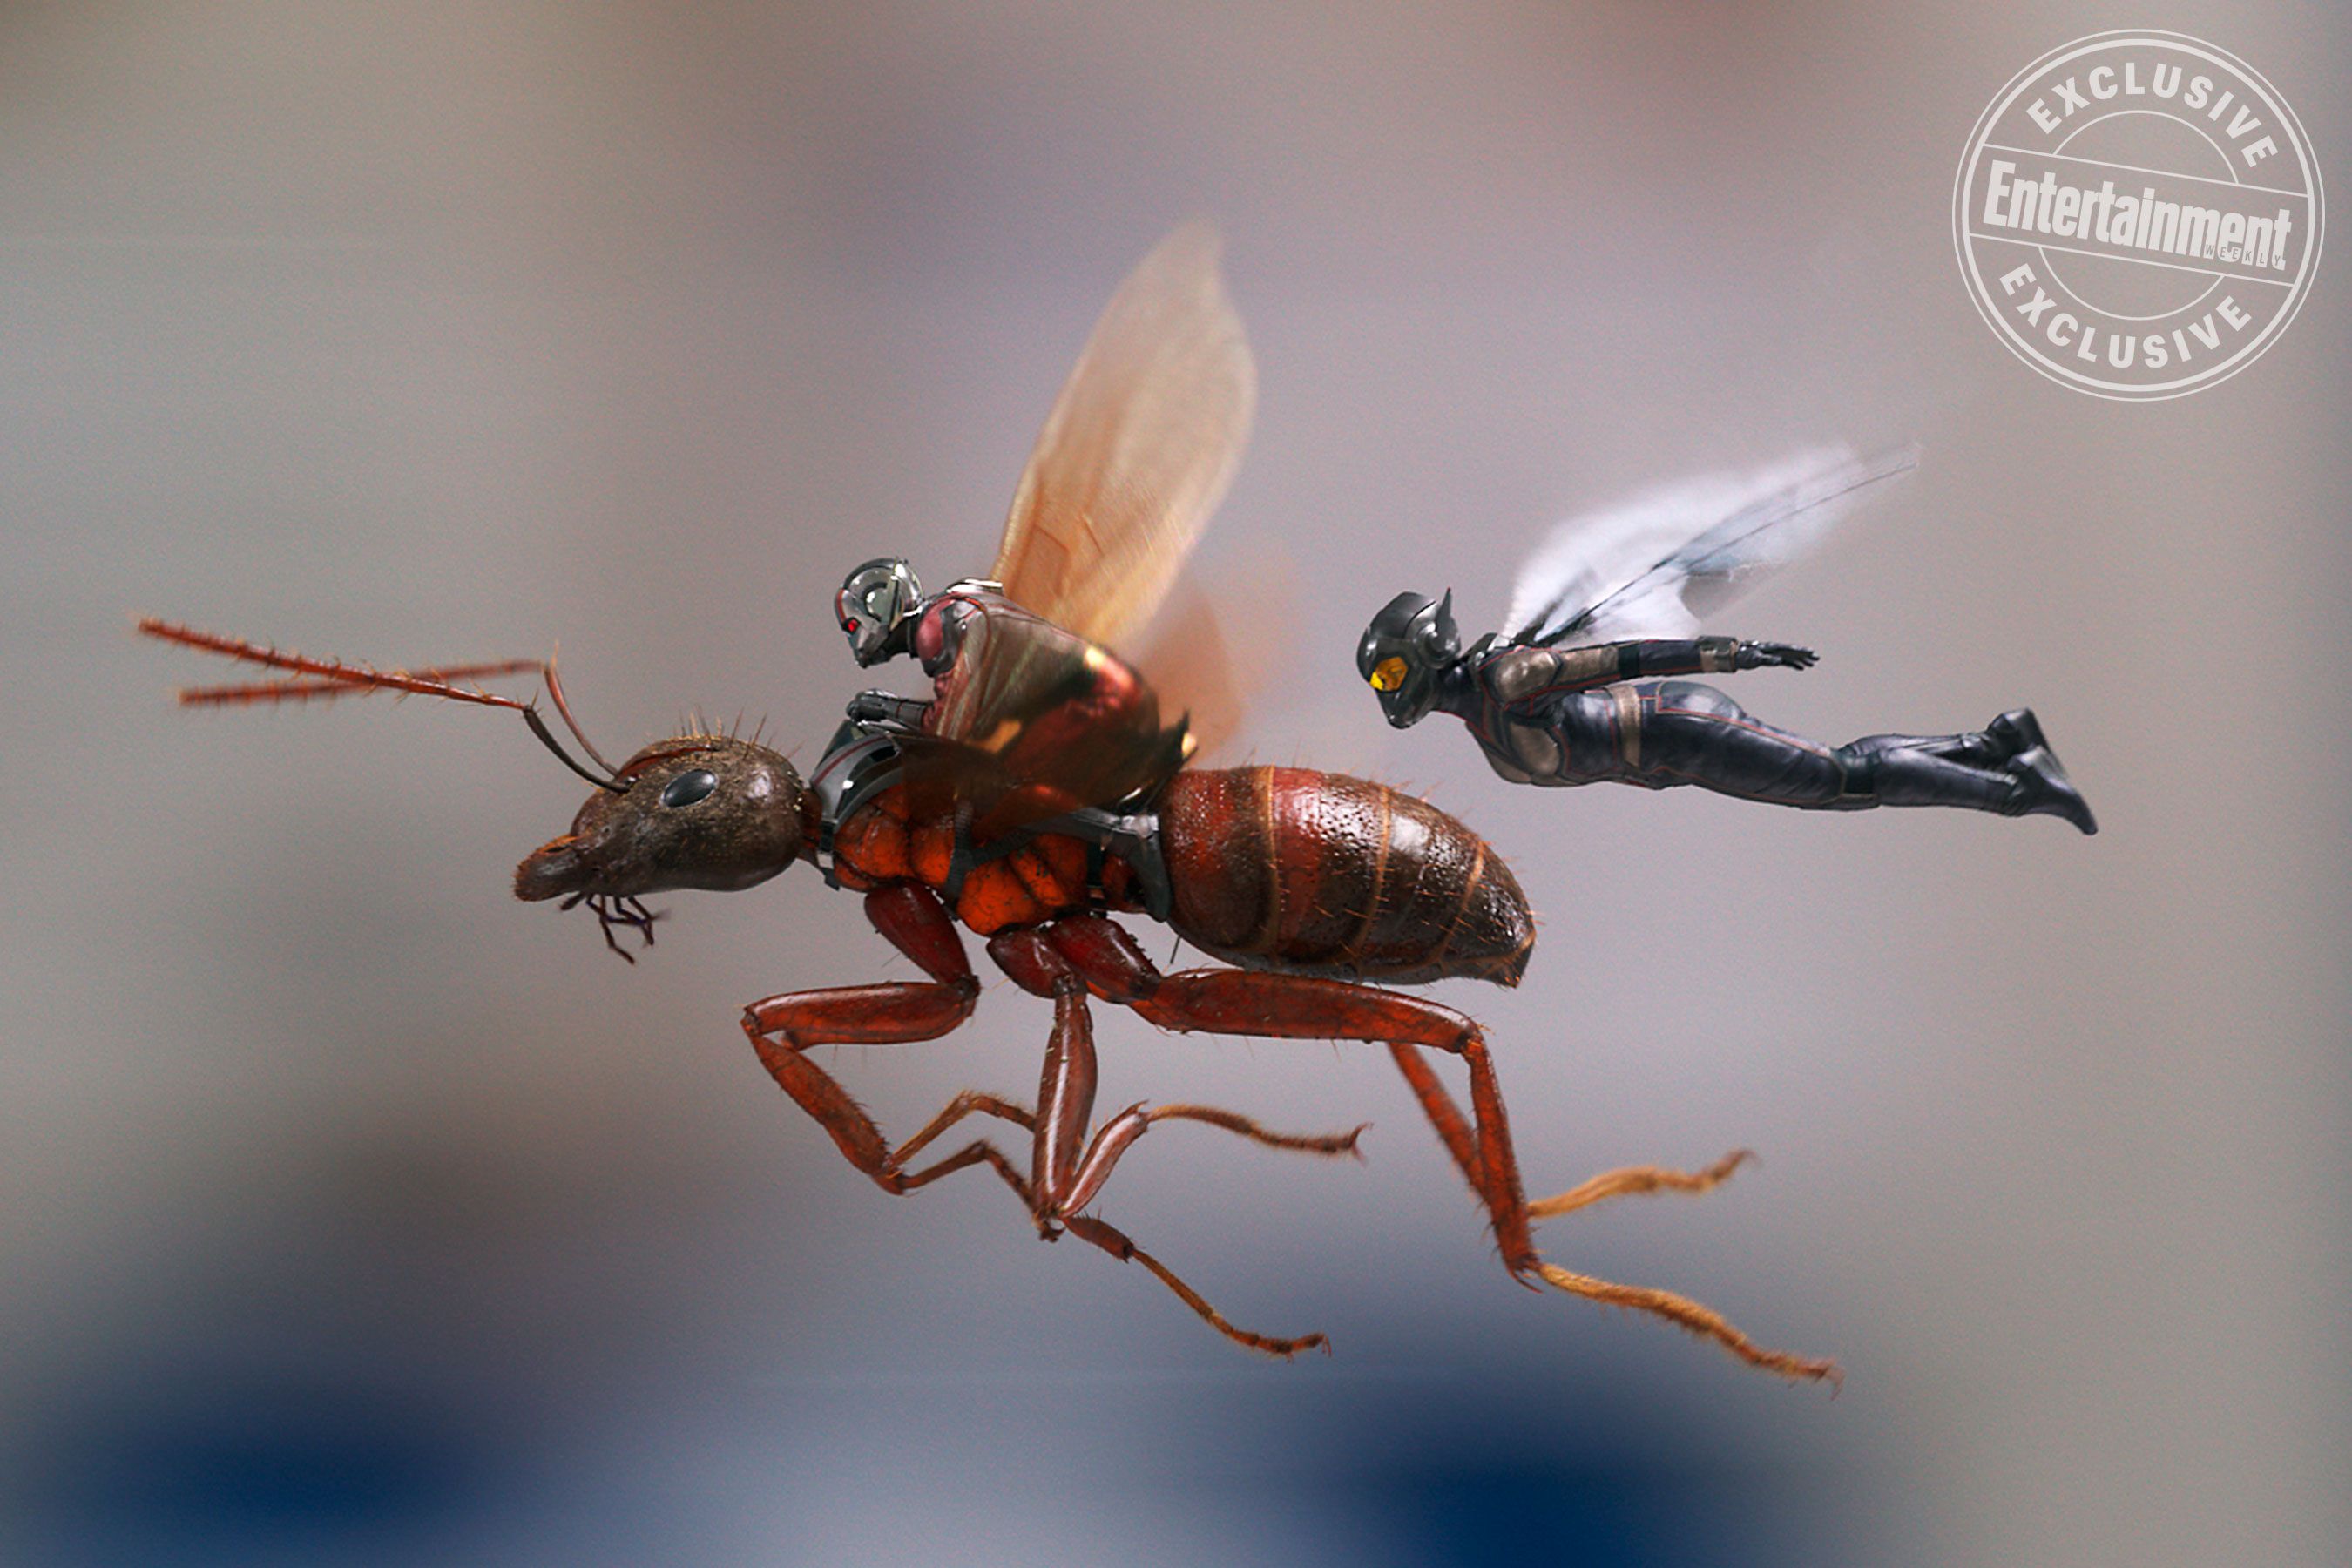 Ant Man And The Wasp Image Reveal The Other Marvel Sequel Of 2018